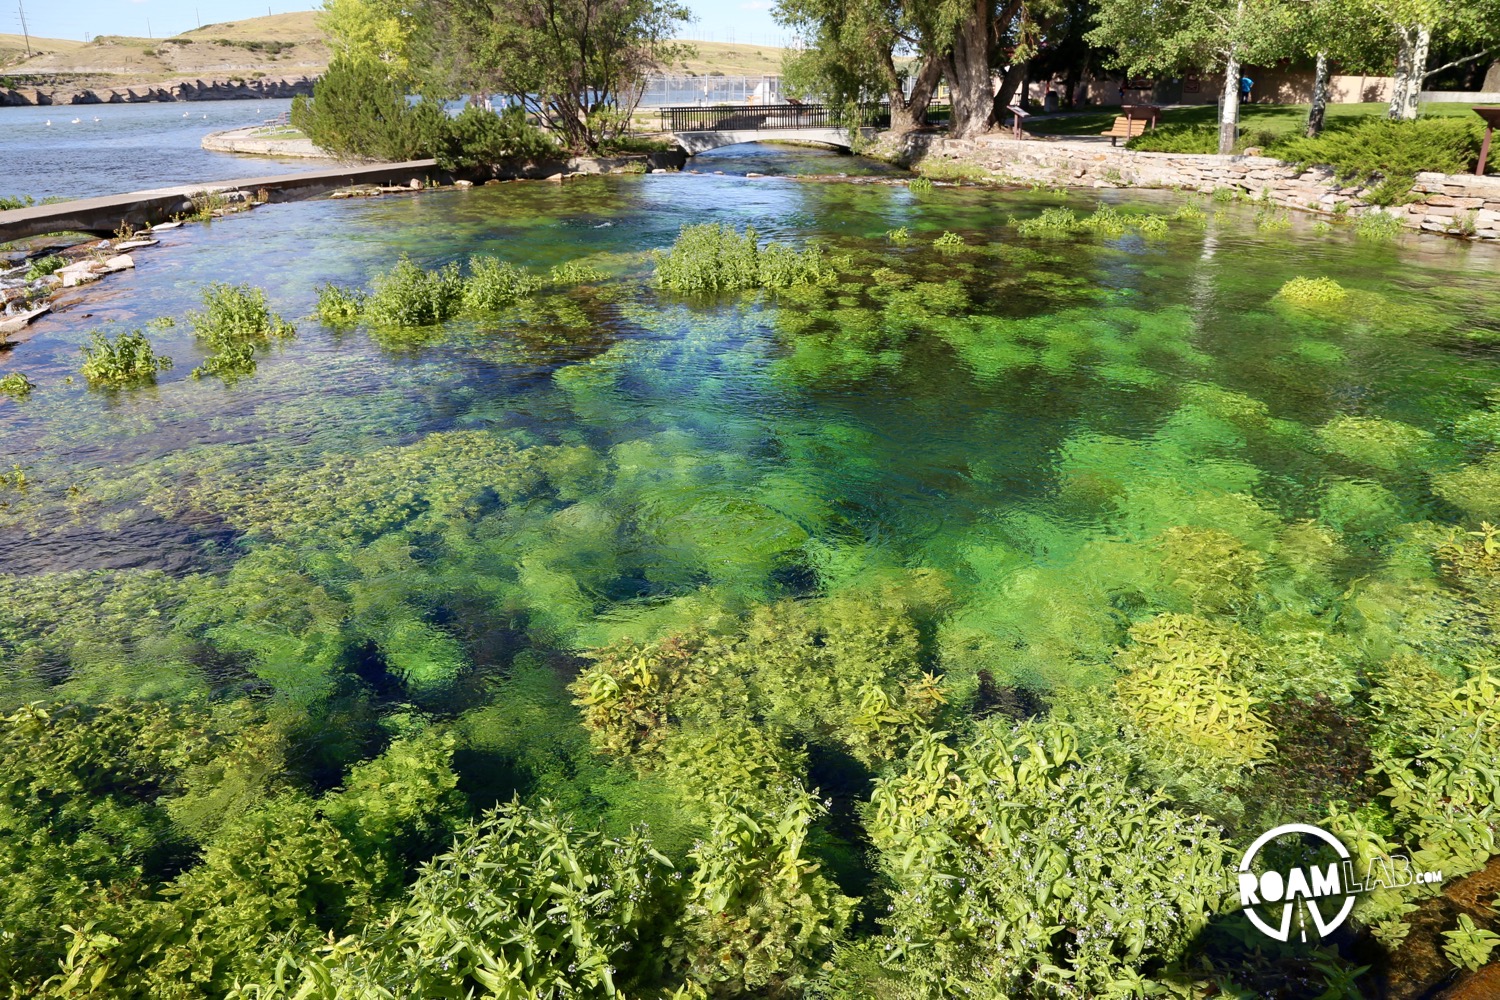 Aquatic plants flourish in the clear water of Giant Springs State Park.